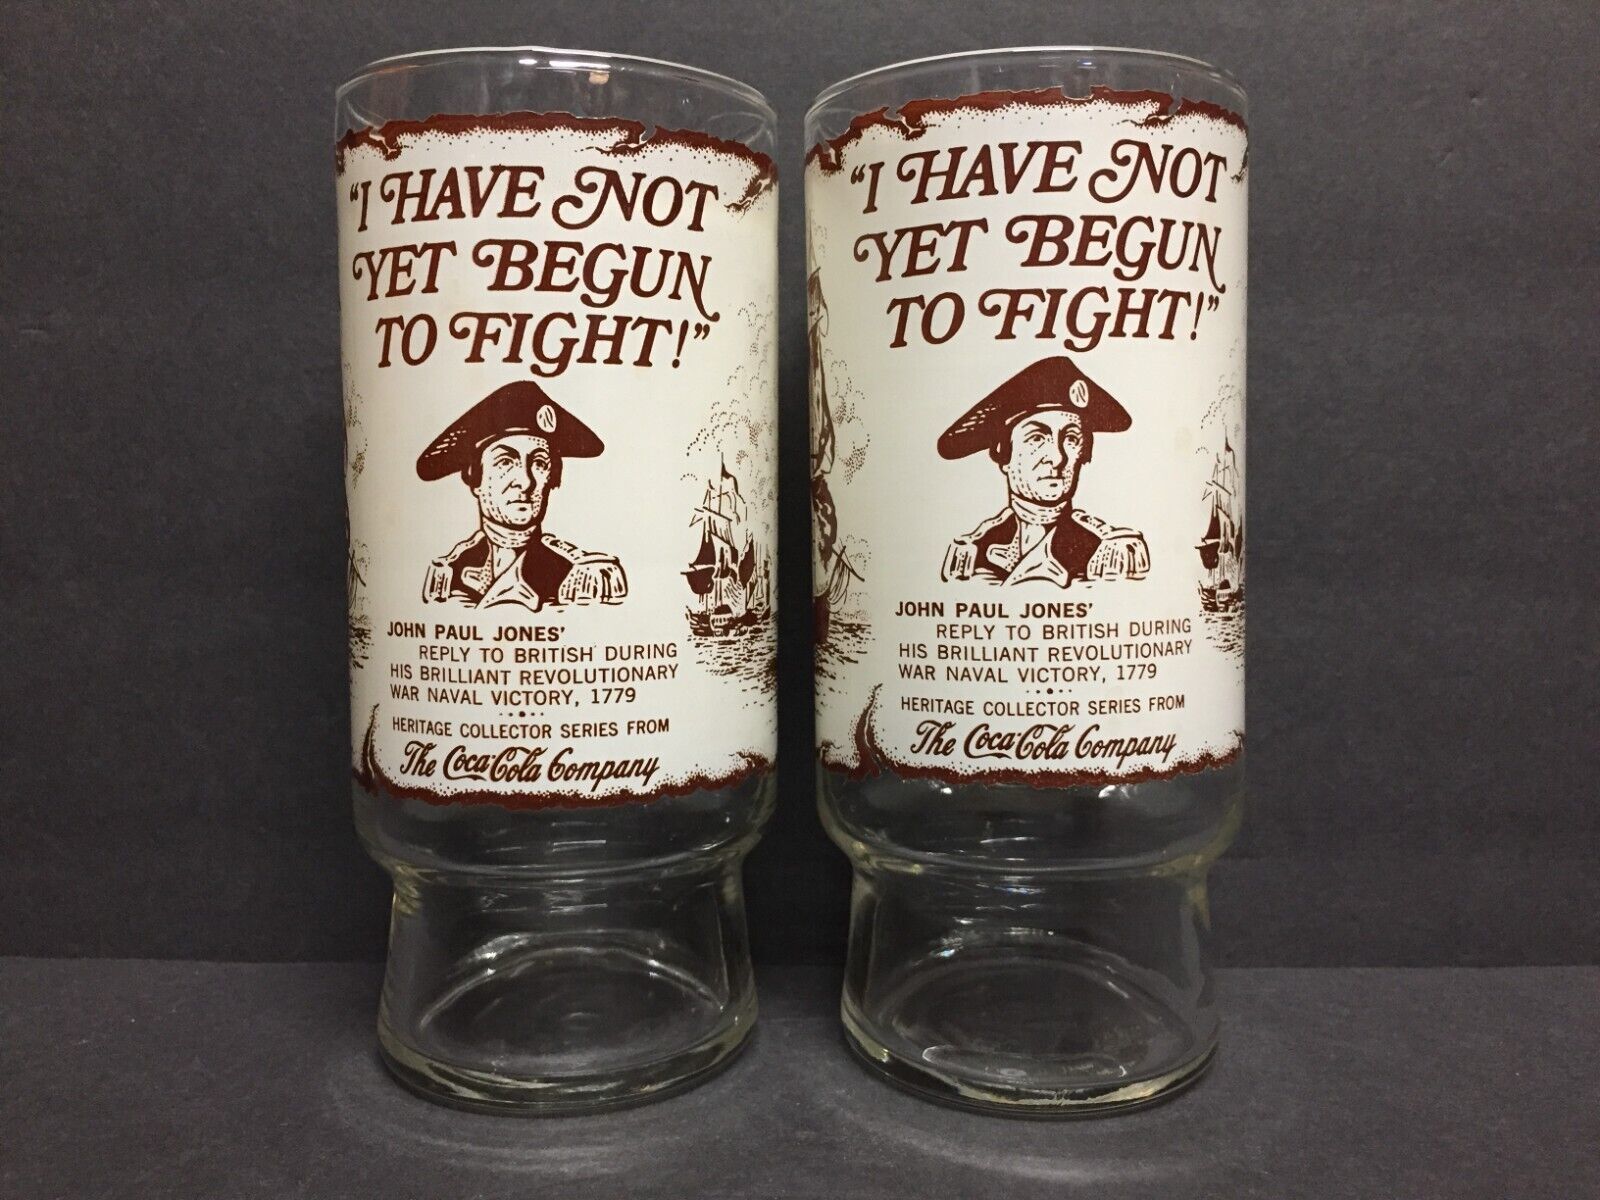 Primary image for 2 The Coca-Cola Company "I Have Not Yet Begun To Fight!" Drinking Glasses Vintag